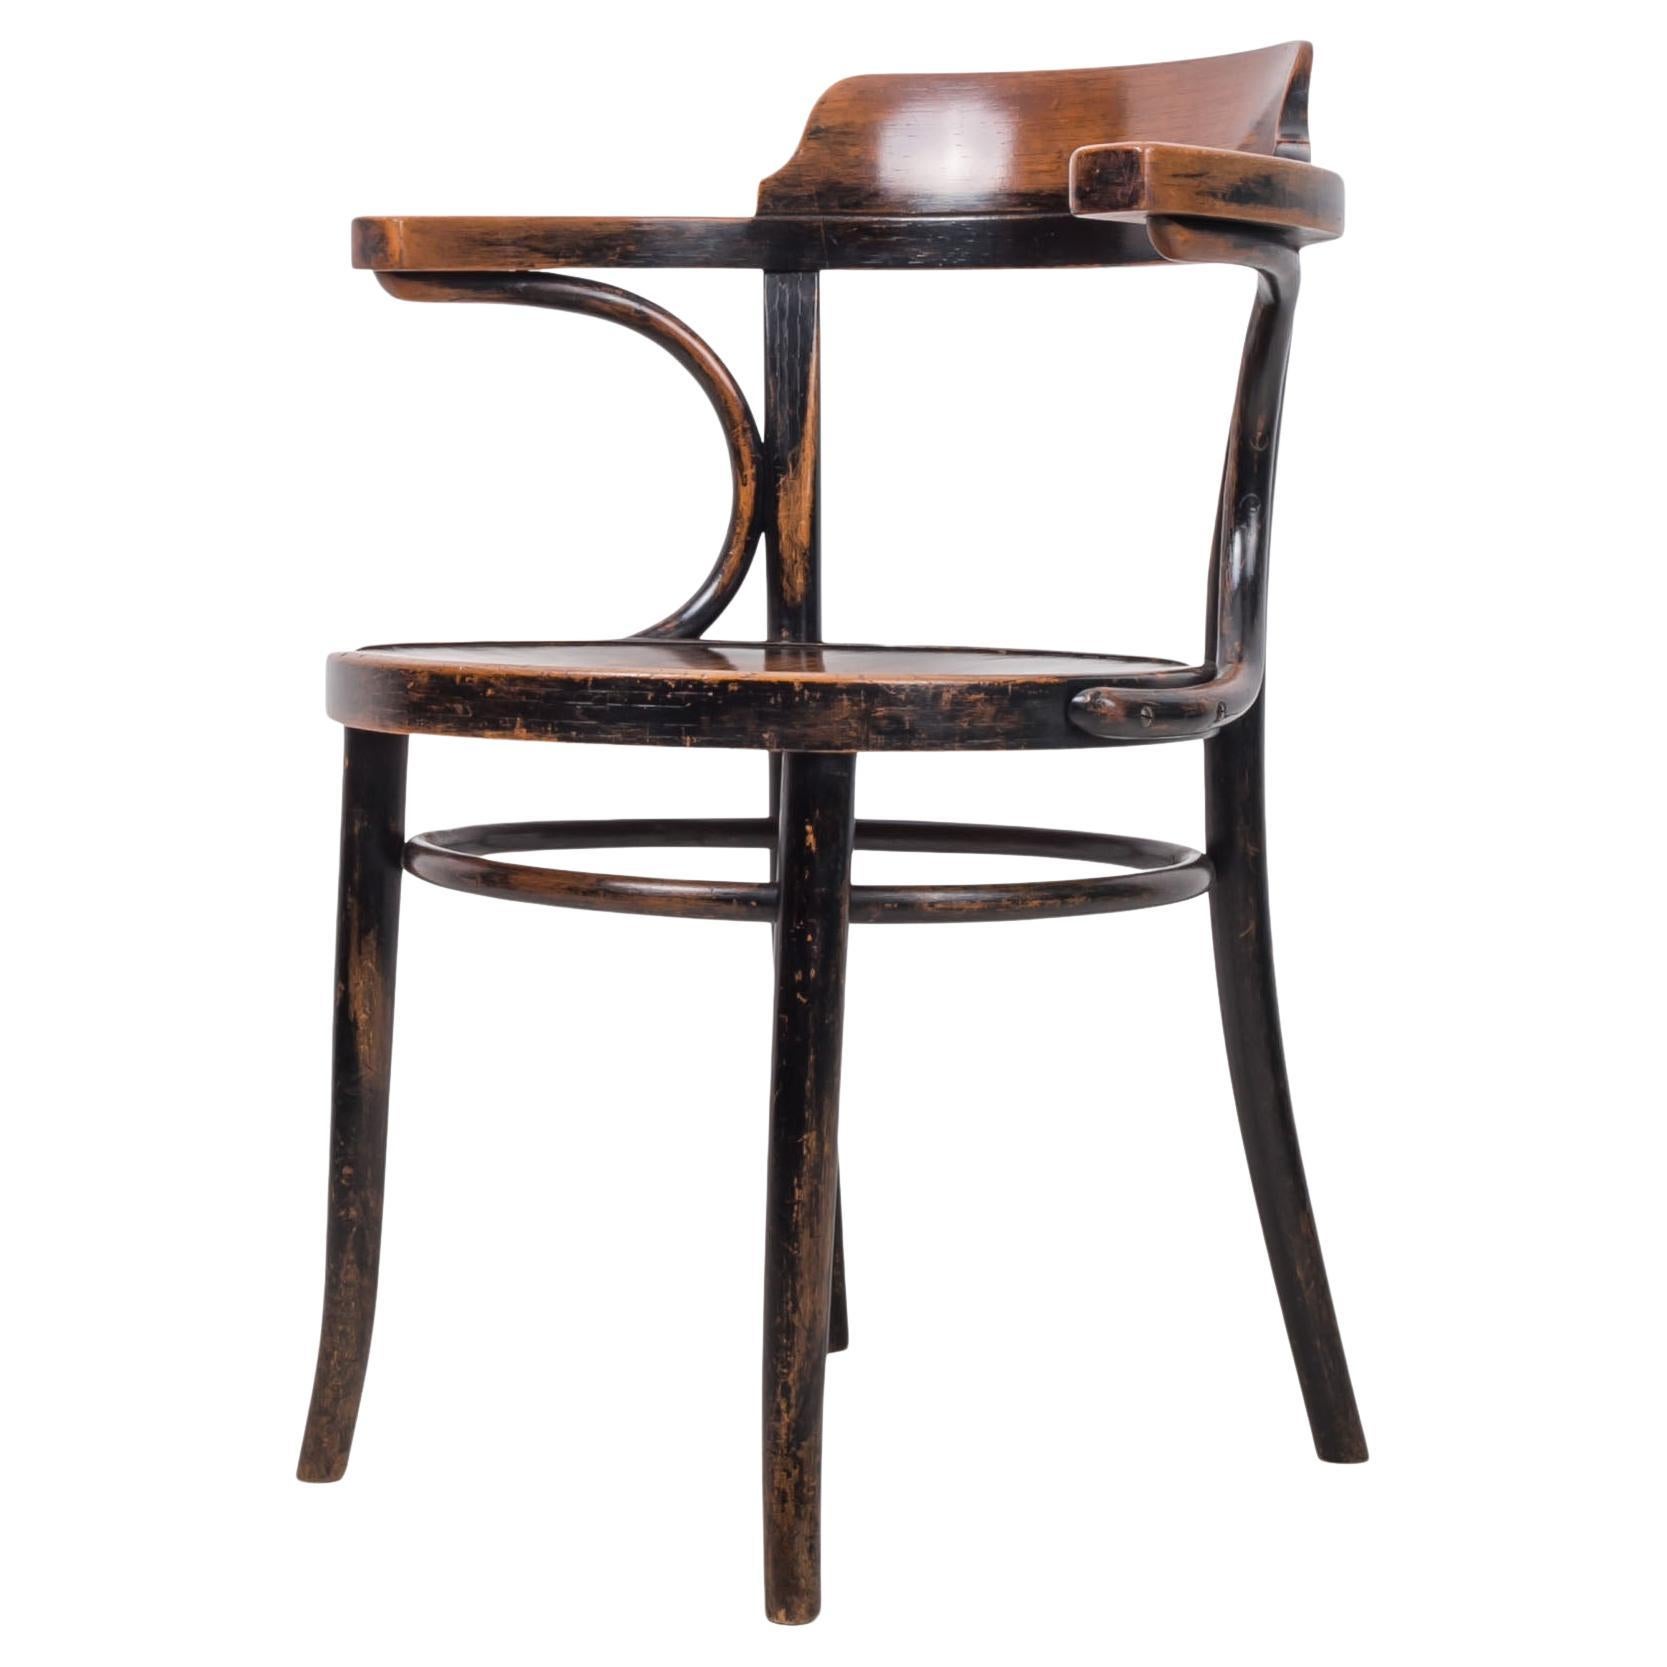 Iconic Thonet Chair Designed by M. Thonet, Bentwood, 1920s